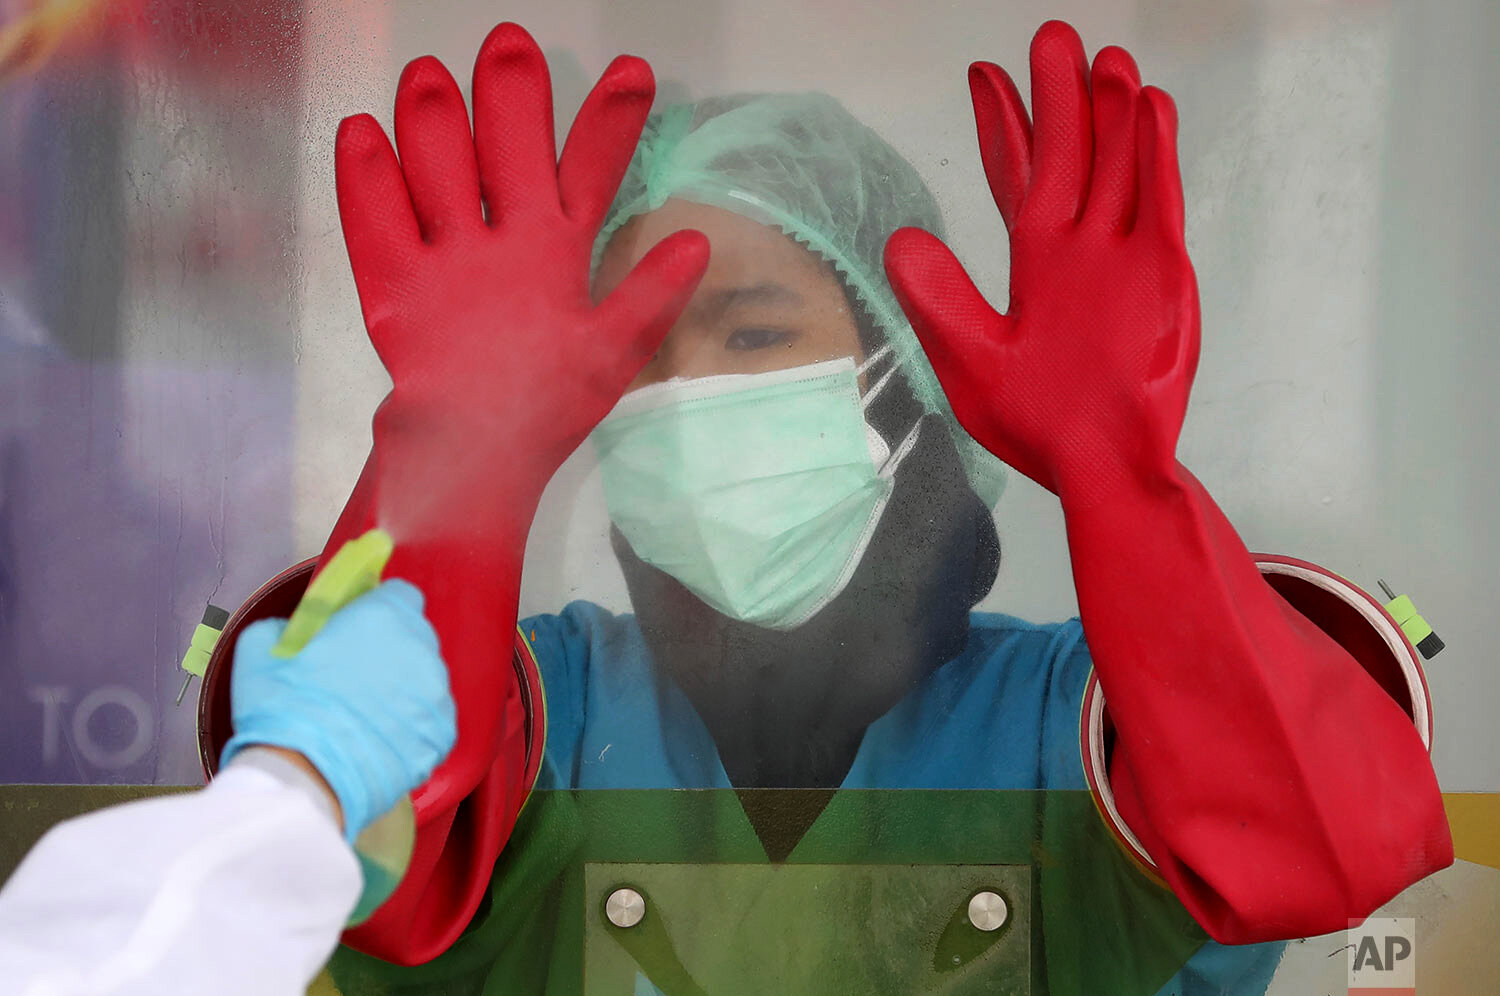  A medical worker is assisted by a colleague to have her rubber gloves sprayed with disinfectant at a walk-through coronavirus test site at Genomik Solidaritas Indonesia Laboratory in Jakarta, Indonesia, Monday, Dec. 14, 2020.  (AP Photo/Dita Alangka